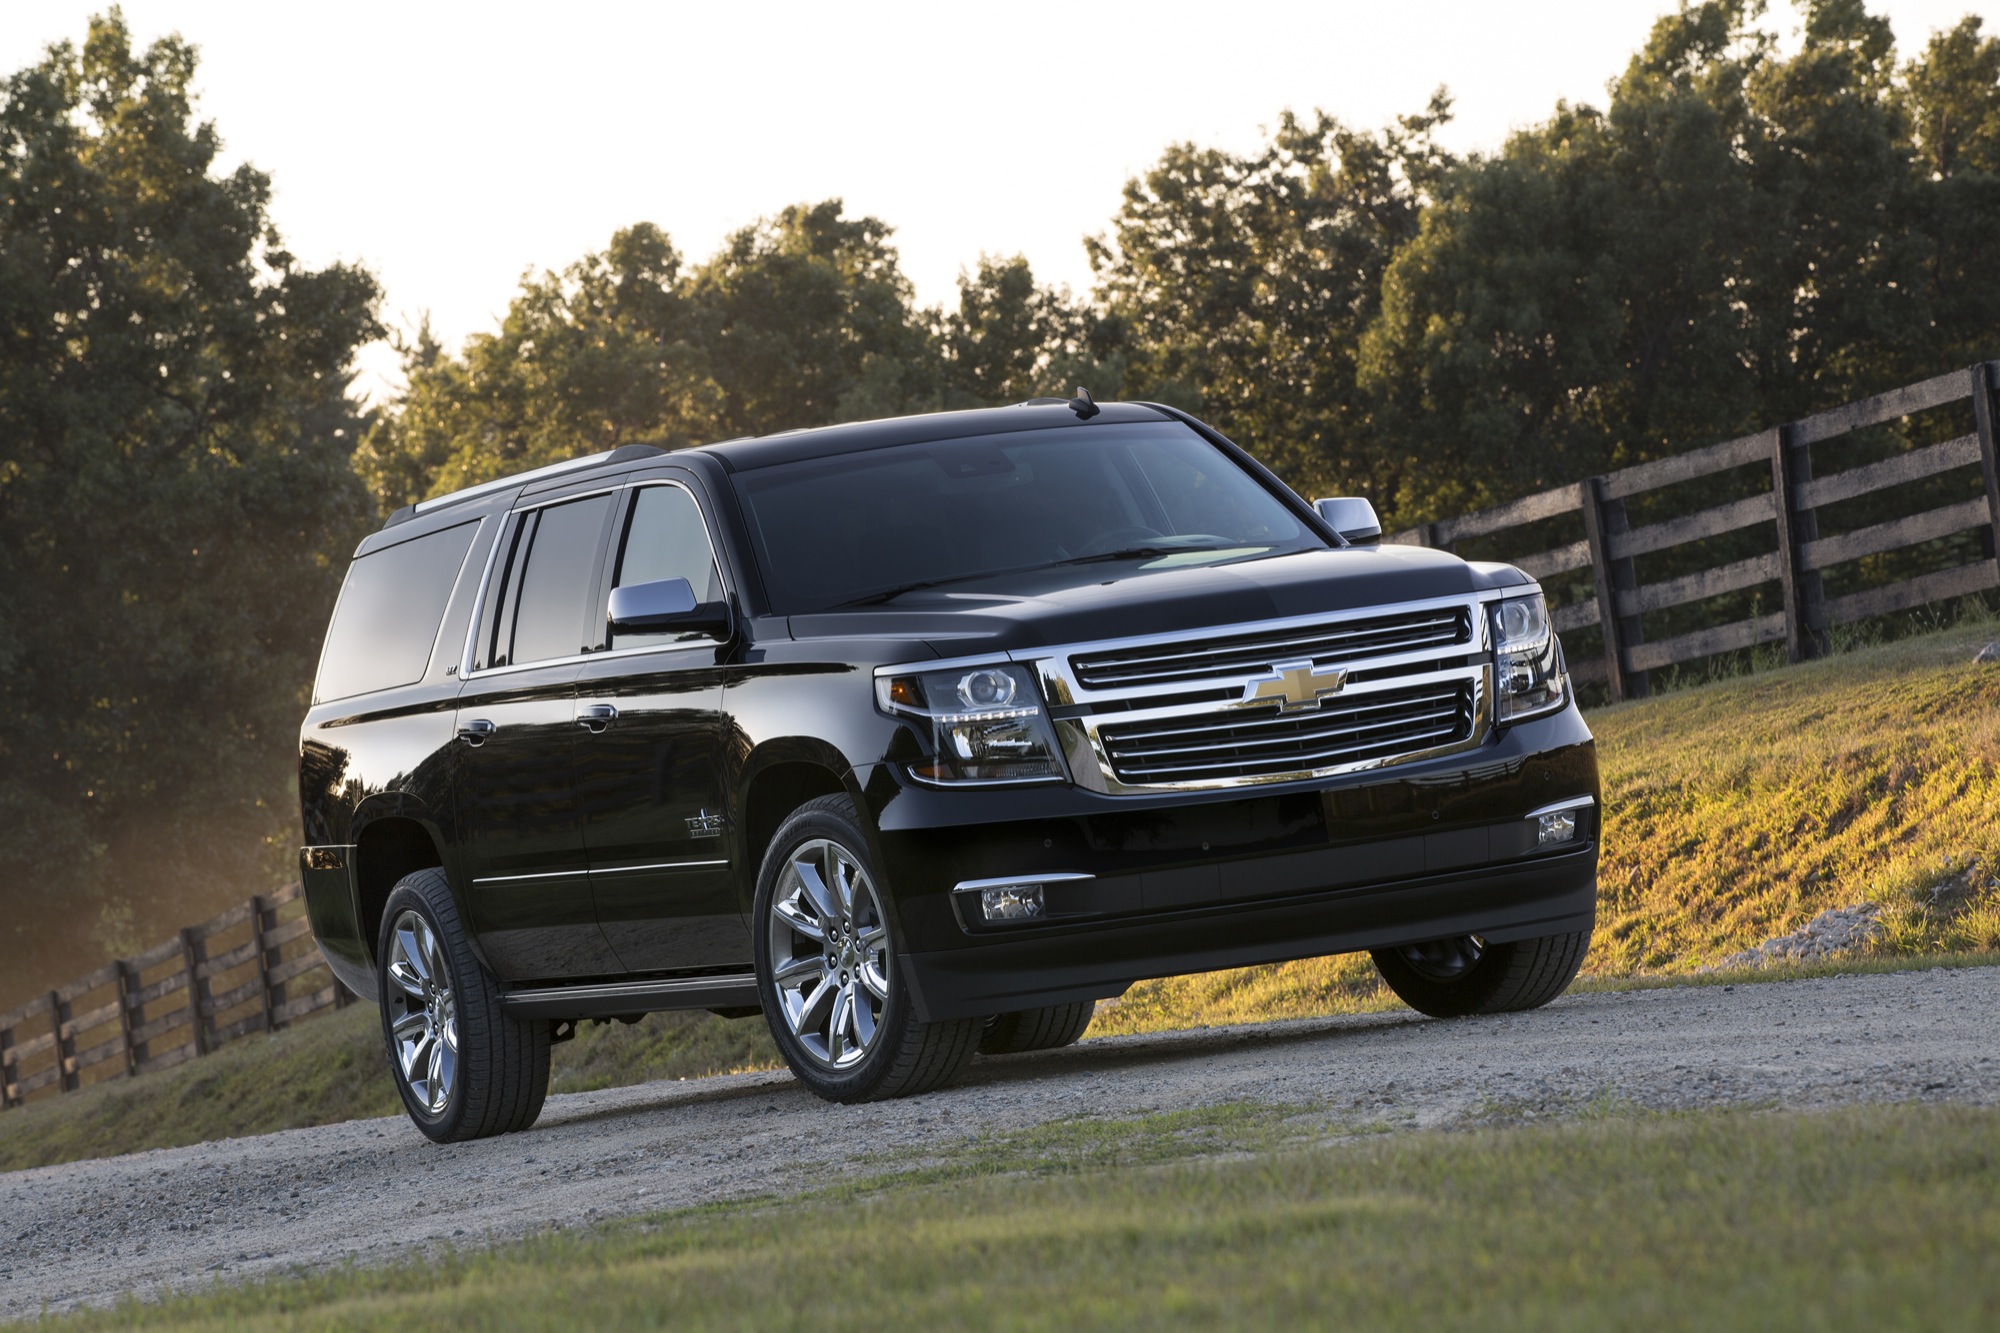 2019 Chevrolet Suburban Order Guide | GM Authority